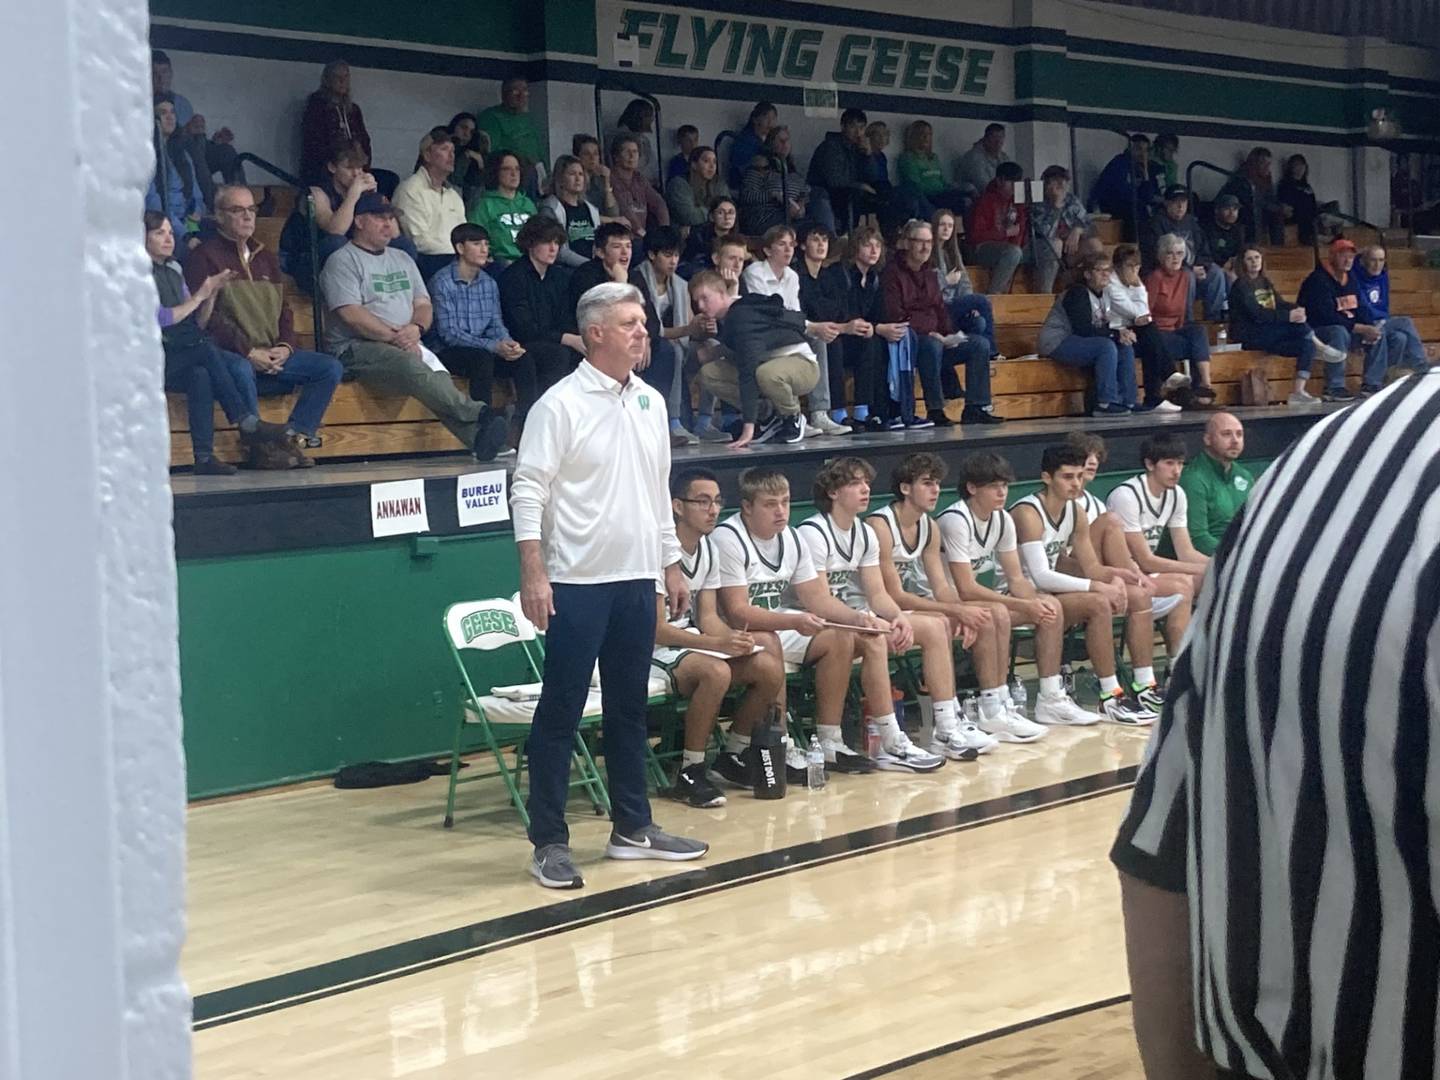 Wethersfield coach Tom McGunnigal, formerly of St. Bede, watches his Geese in action Wednesday. The Geese beat Stark County 60-49 to improve to 2-1.